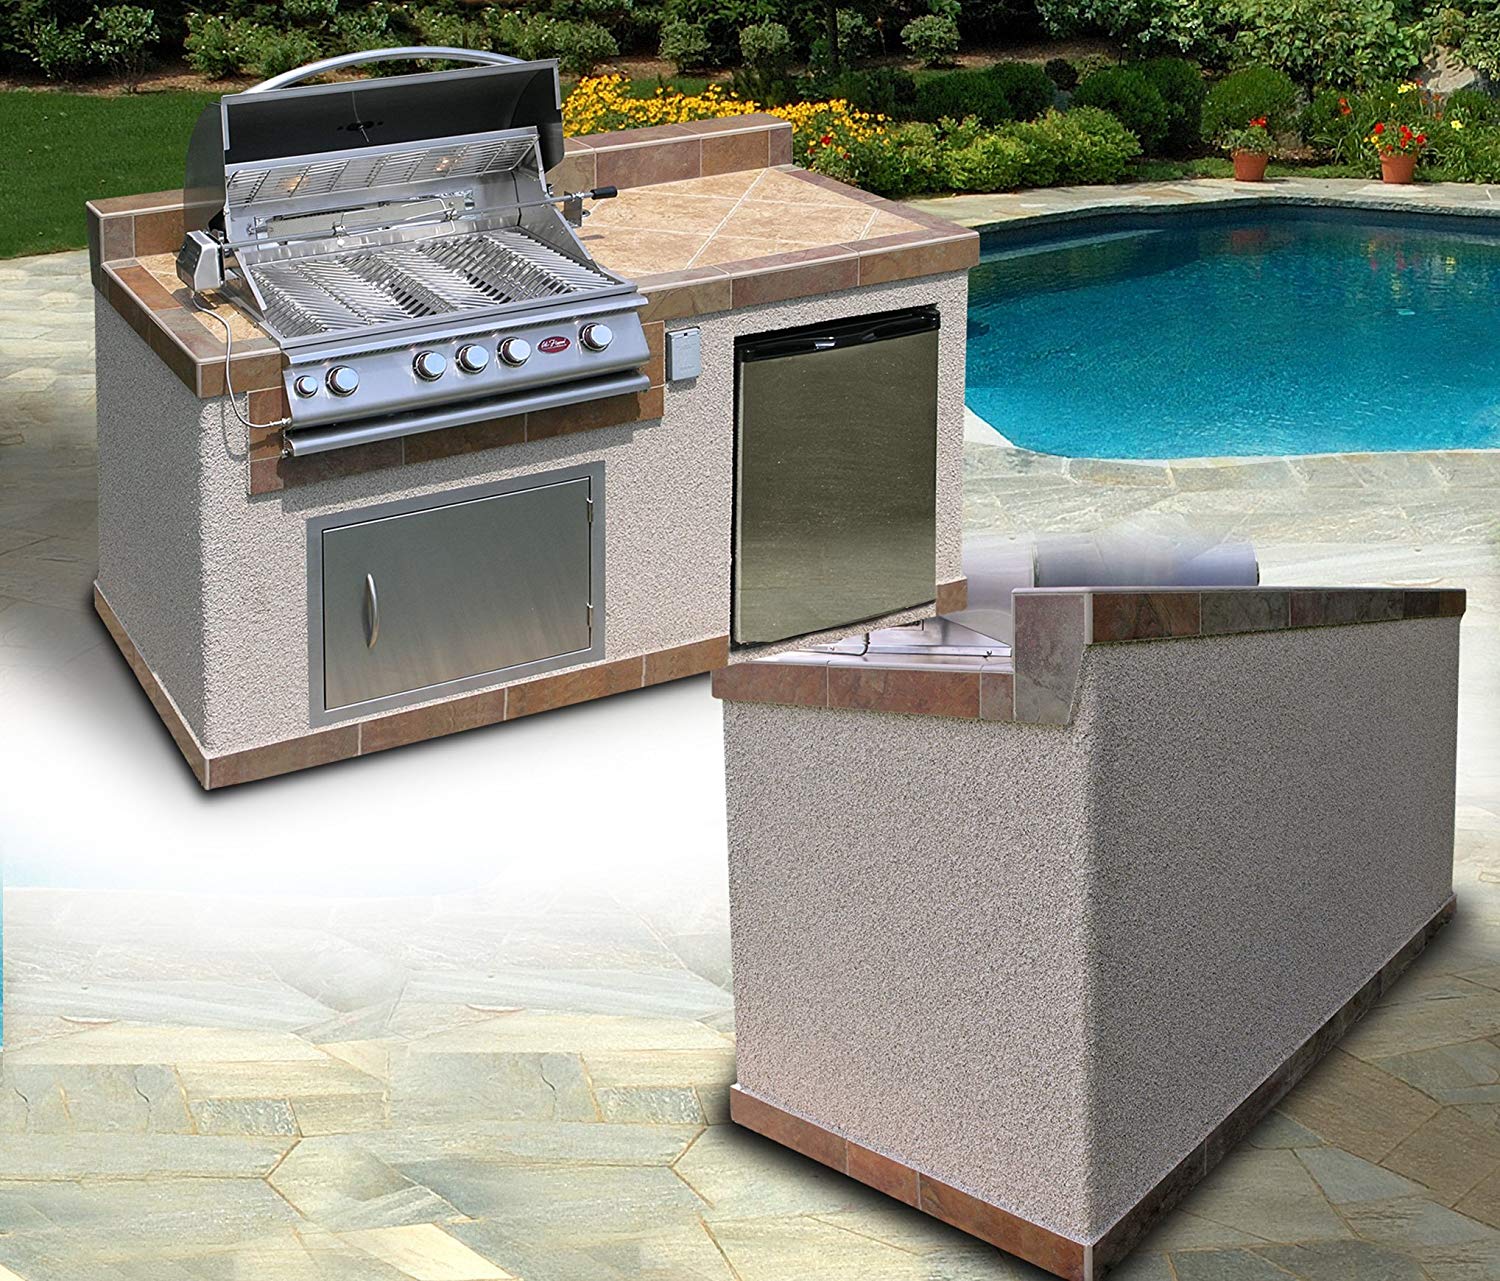 Cal FlameCal Flame 6 Foot BBQ Island with 4-Burner Built in Grill, 27